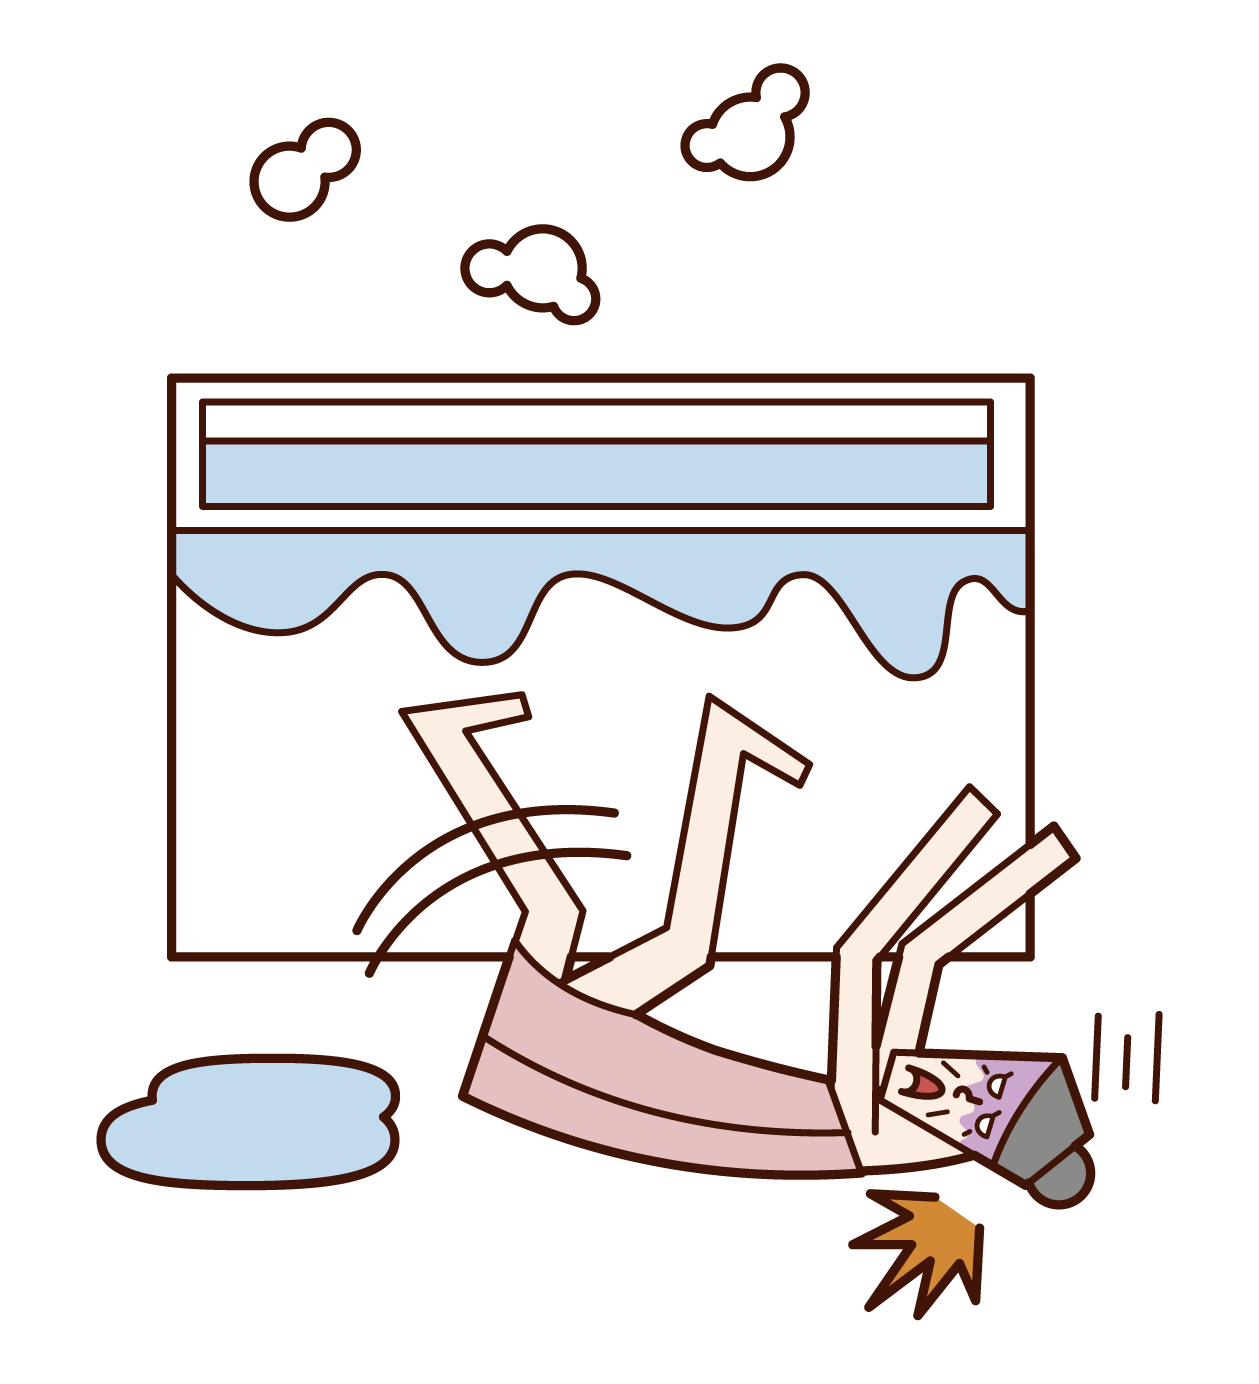 Illustration of a person (grandmother) falling in the bathroom